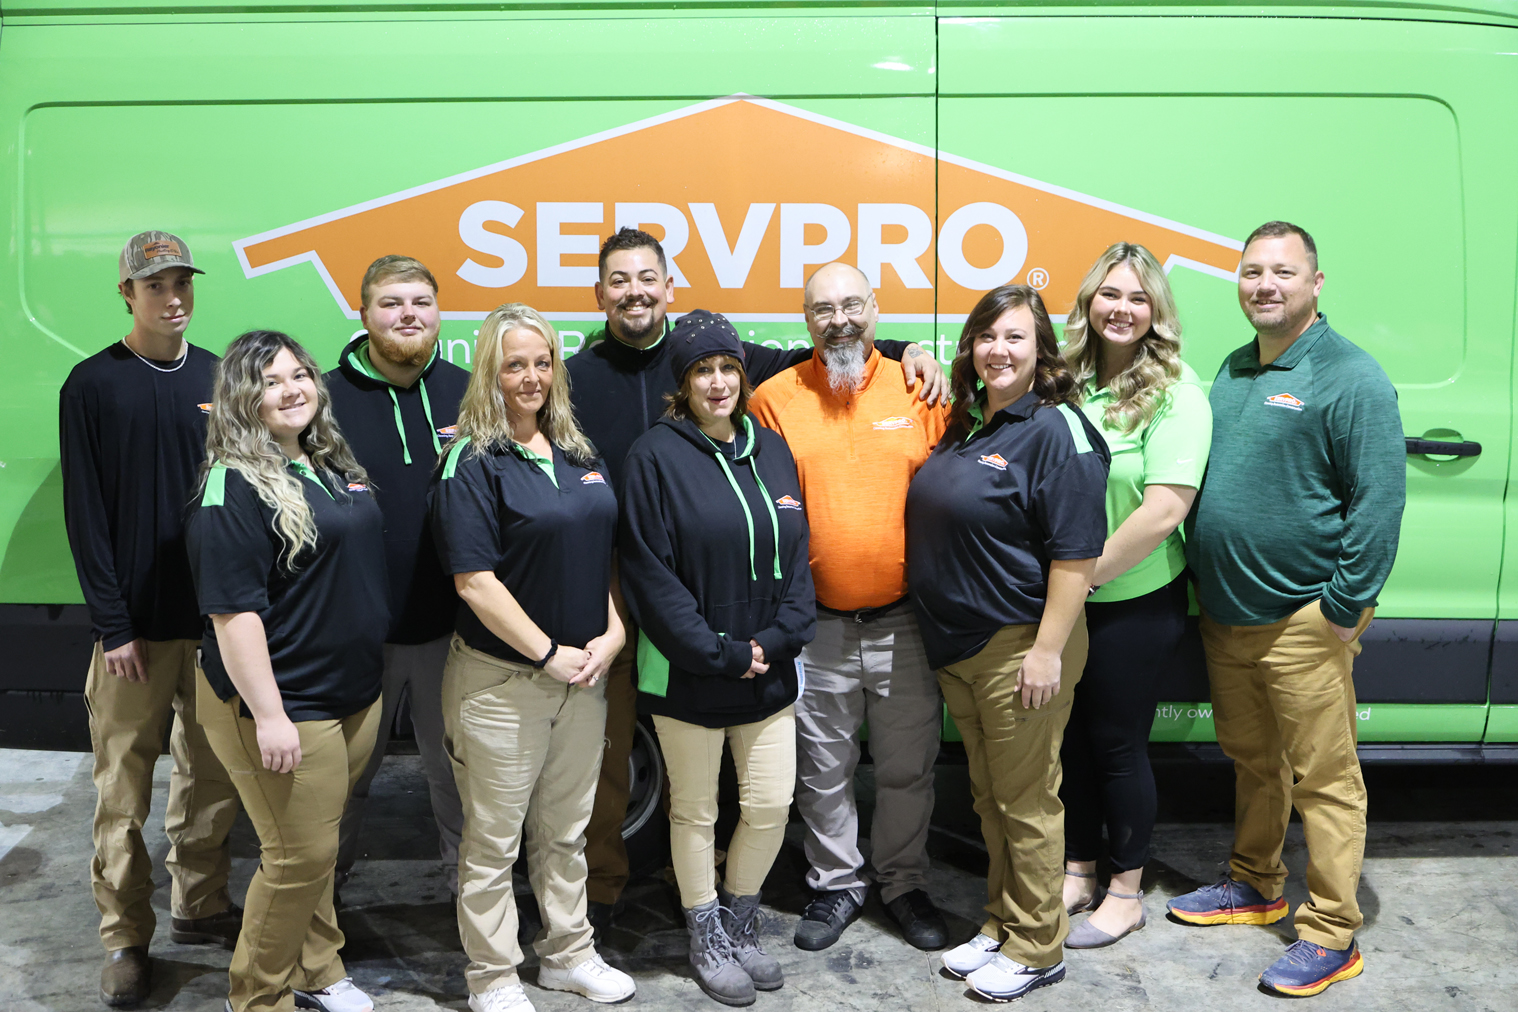 SERVPRO of Madison, Lawrenceburg and Versailles 100 W Quality Ln, Versailles Indiana 47042